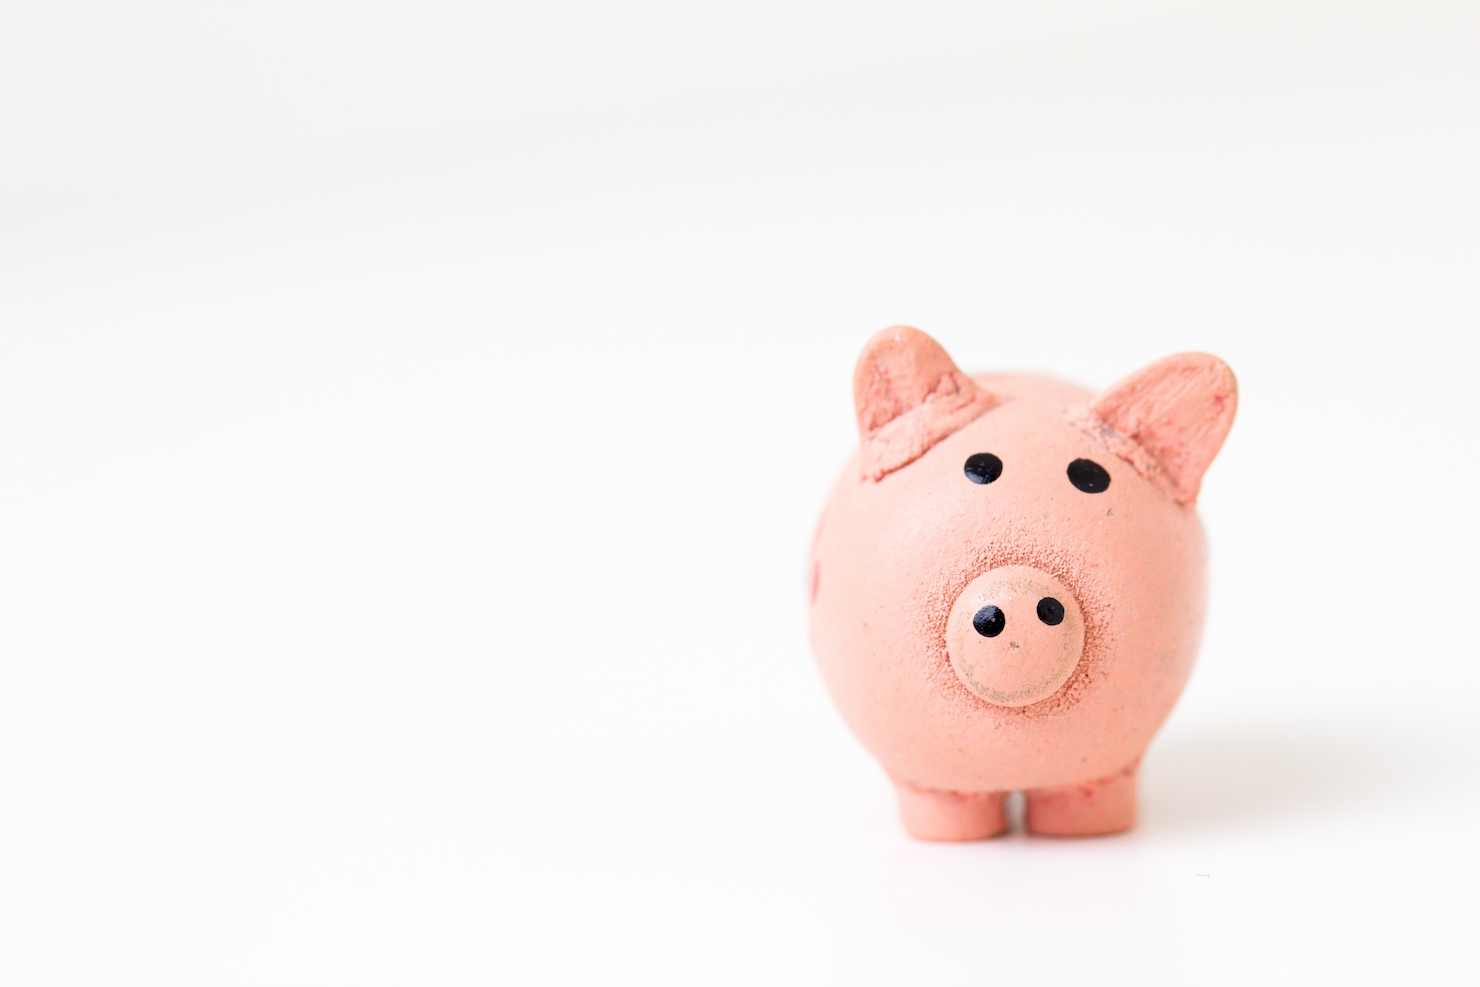 You don't need to break your piggy bank for Shared Hosting.